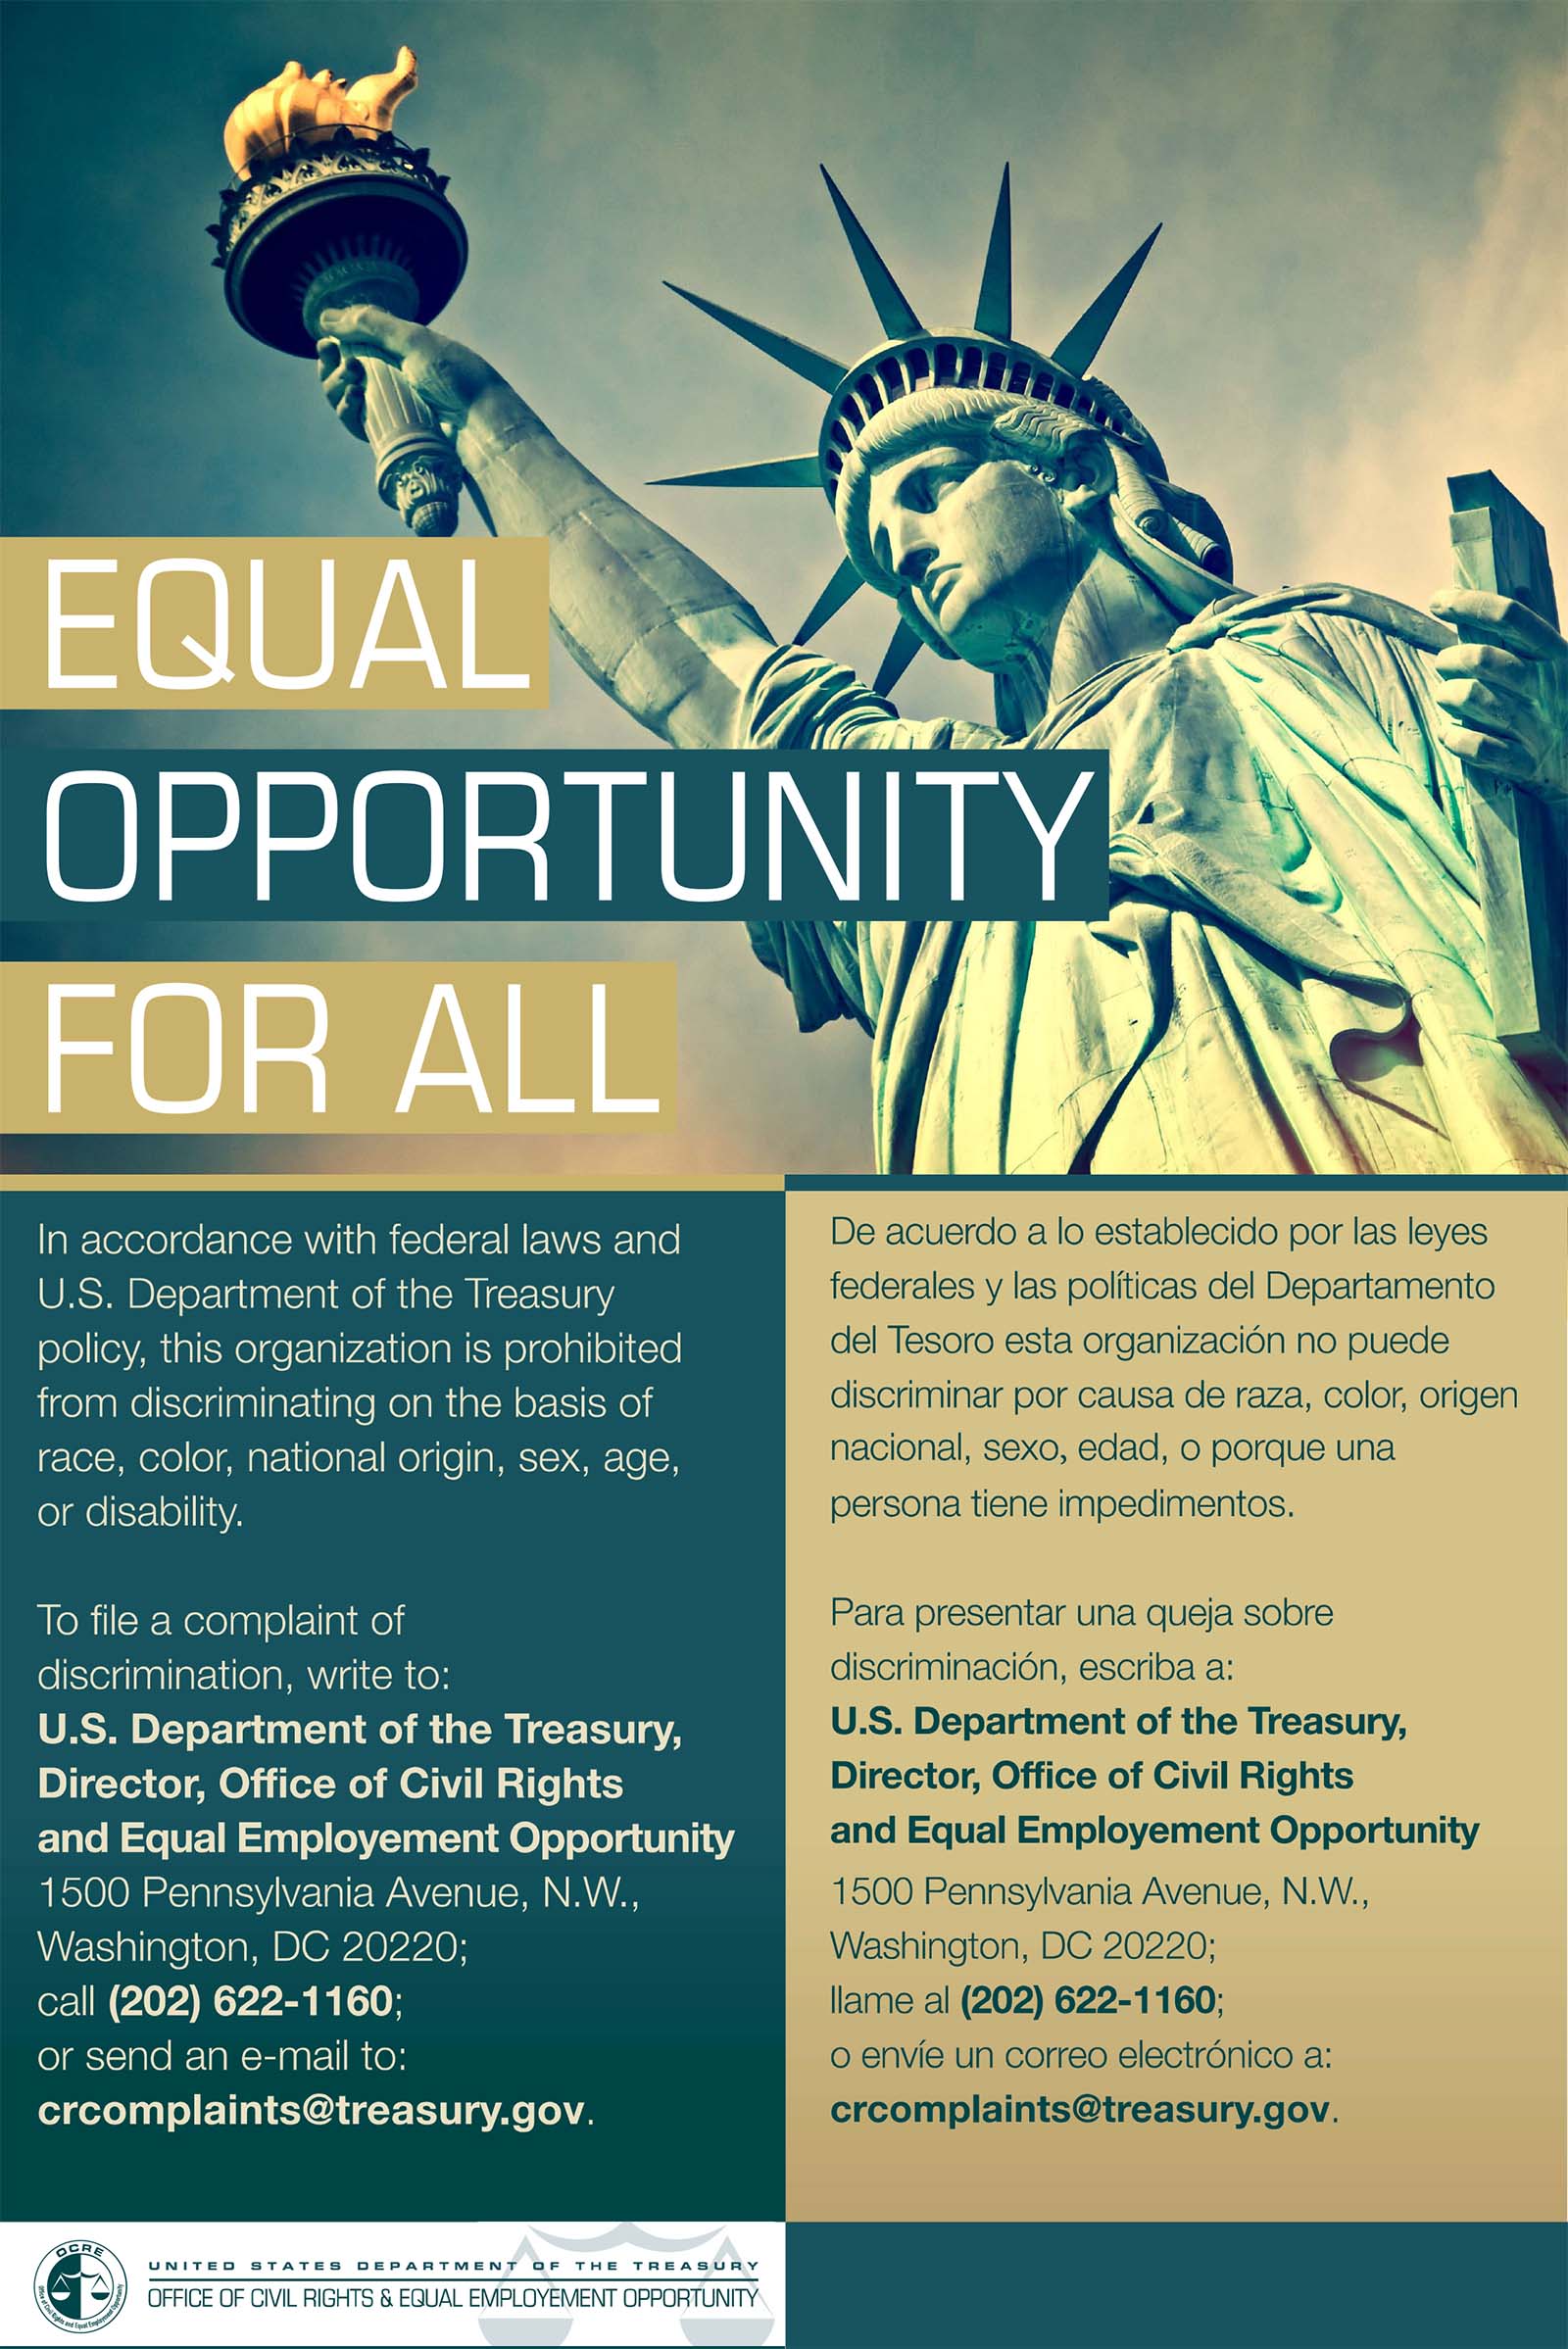 Equal Opportunity for All poster - full text provided next on page